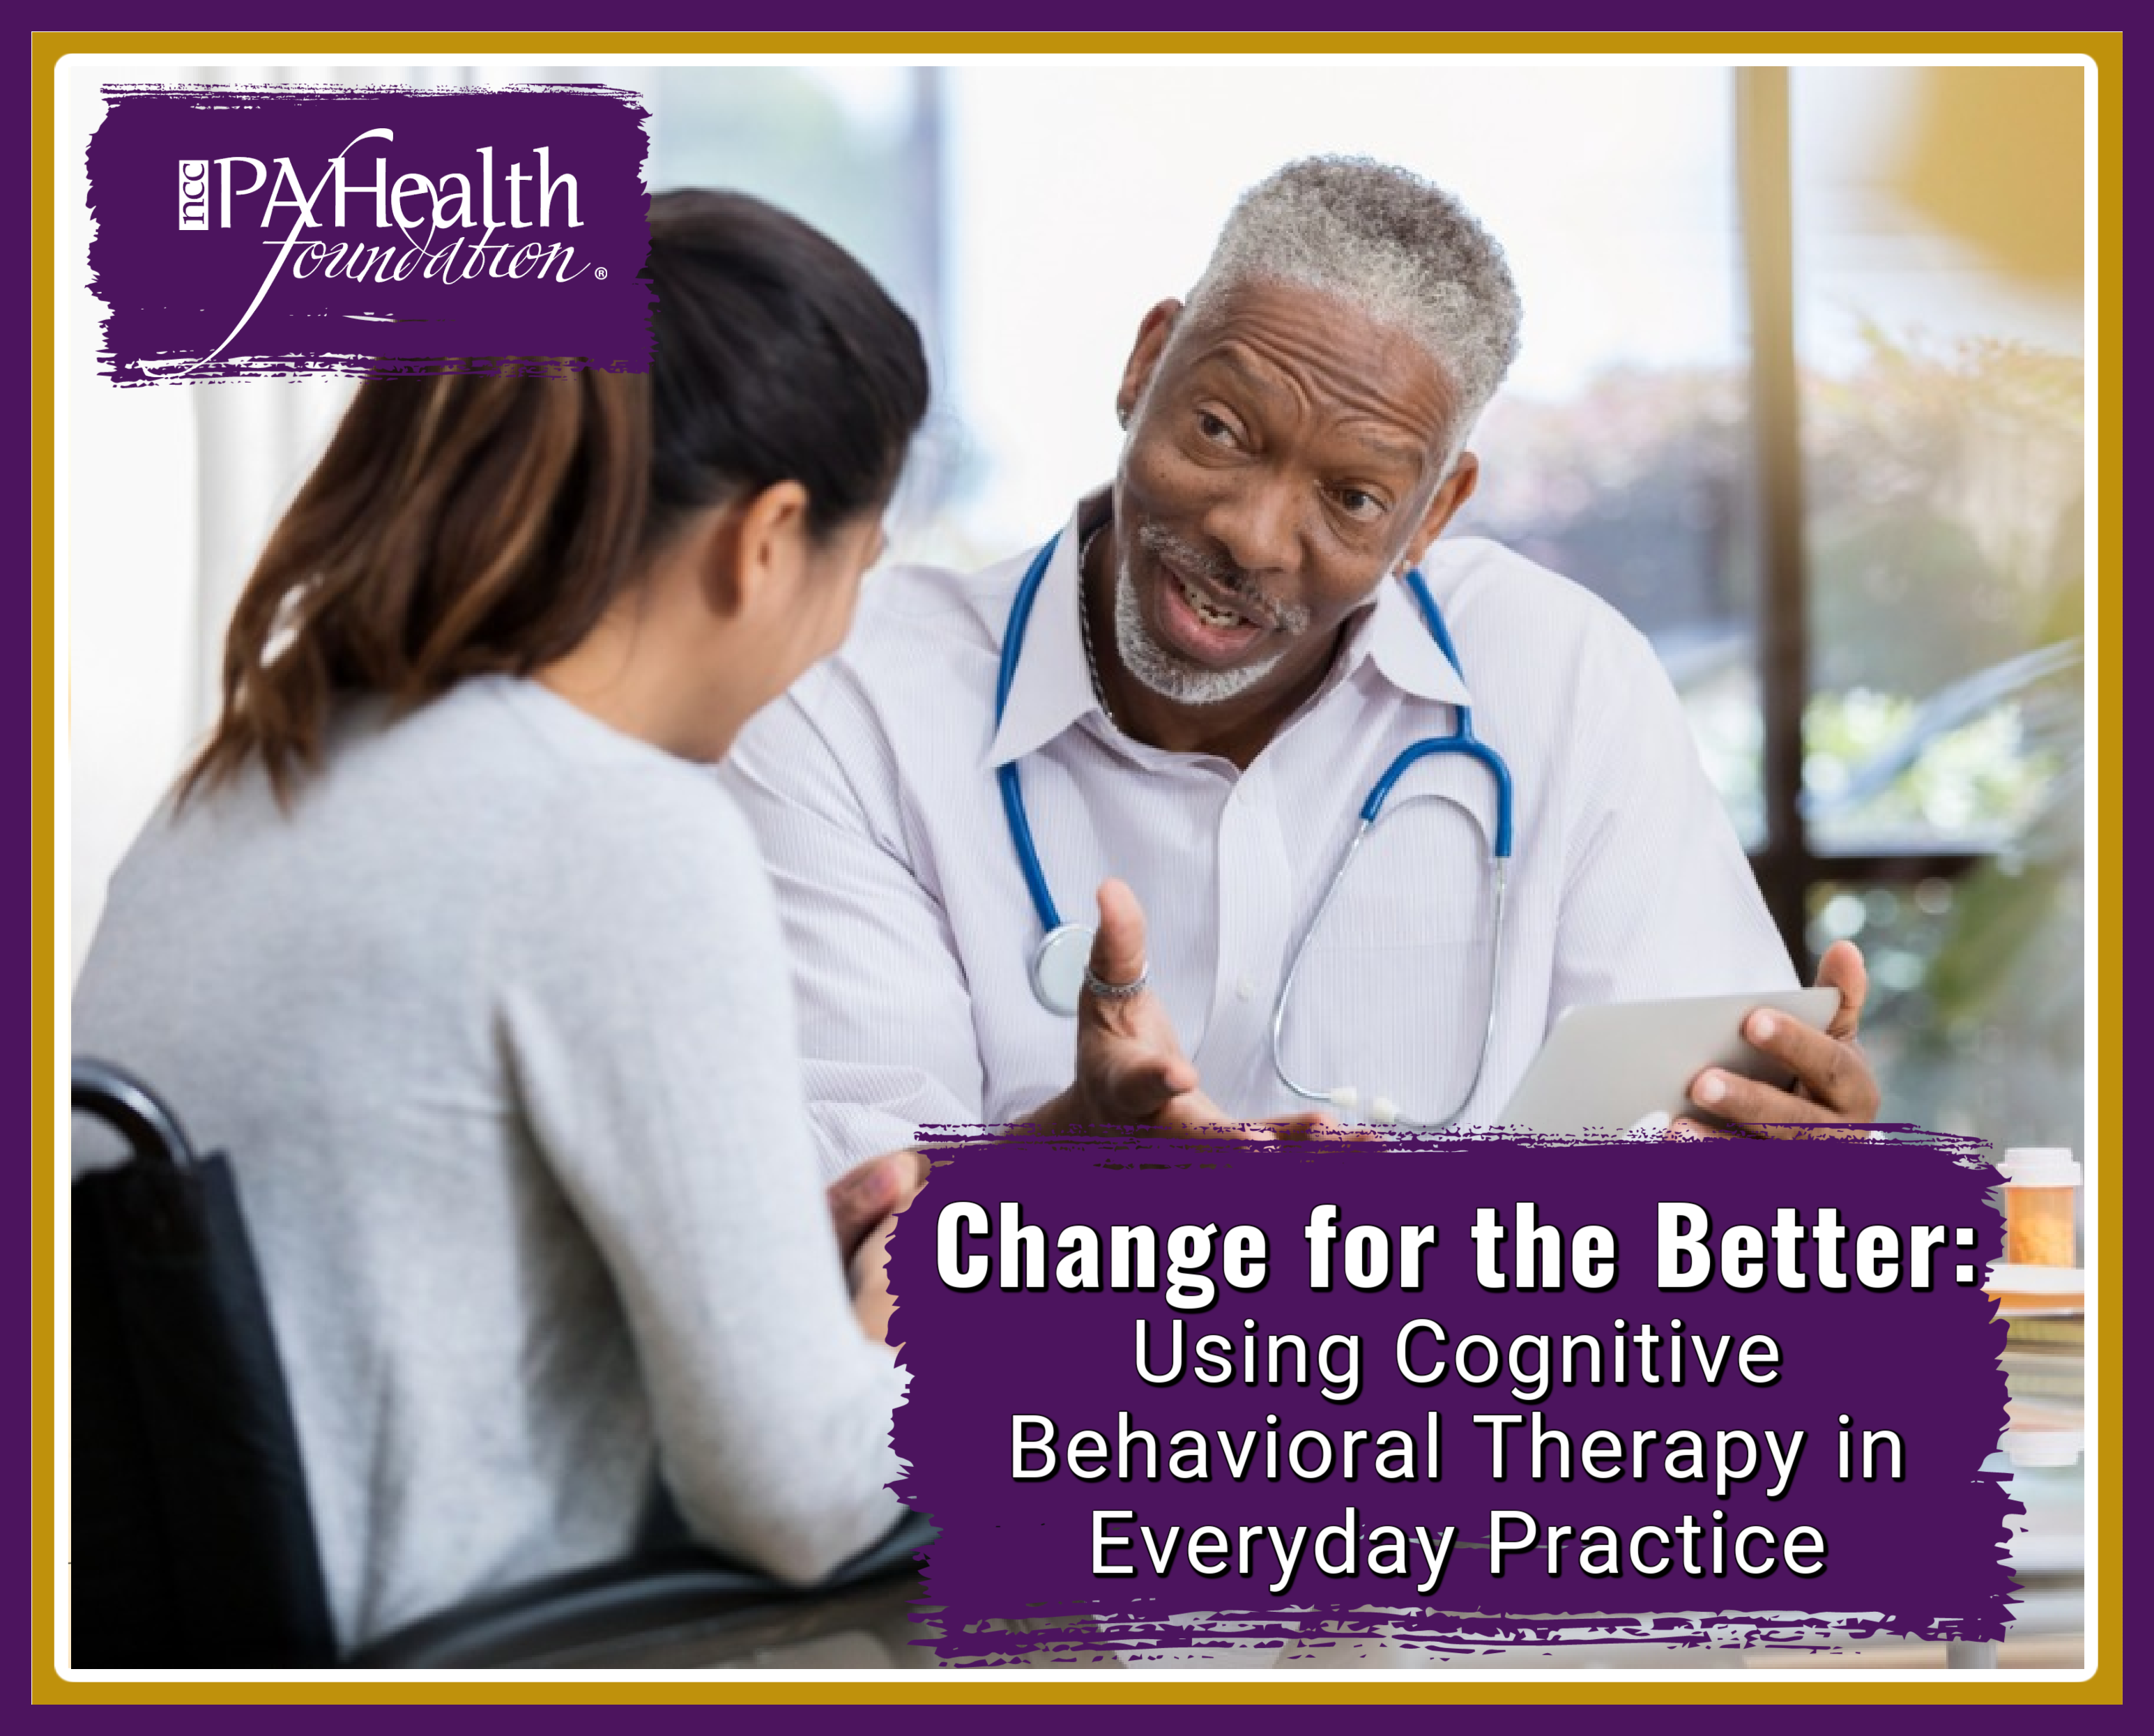 Change for the Better: Using Cognitive Behavioral Therapy in Everyday Practice